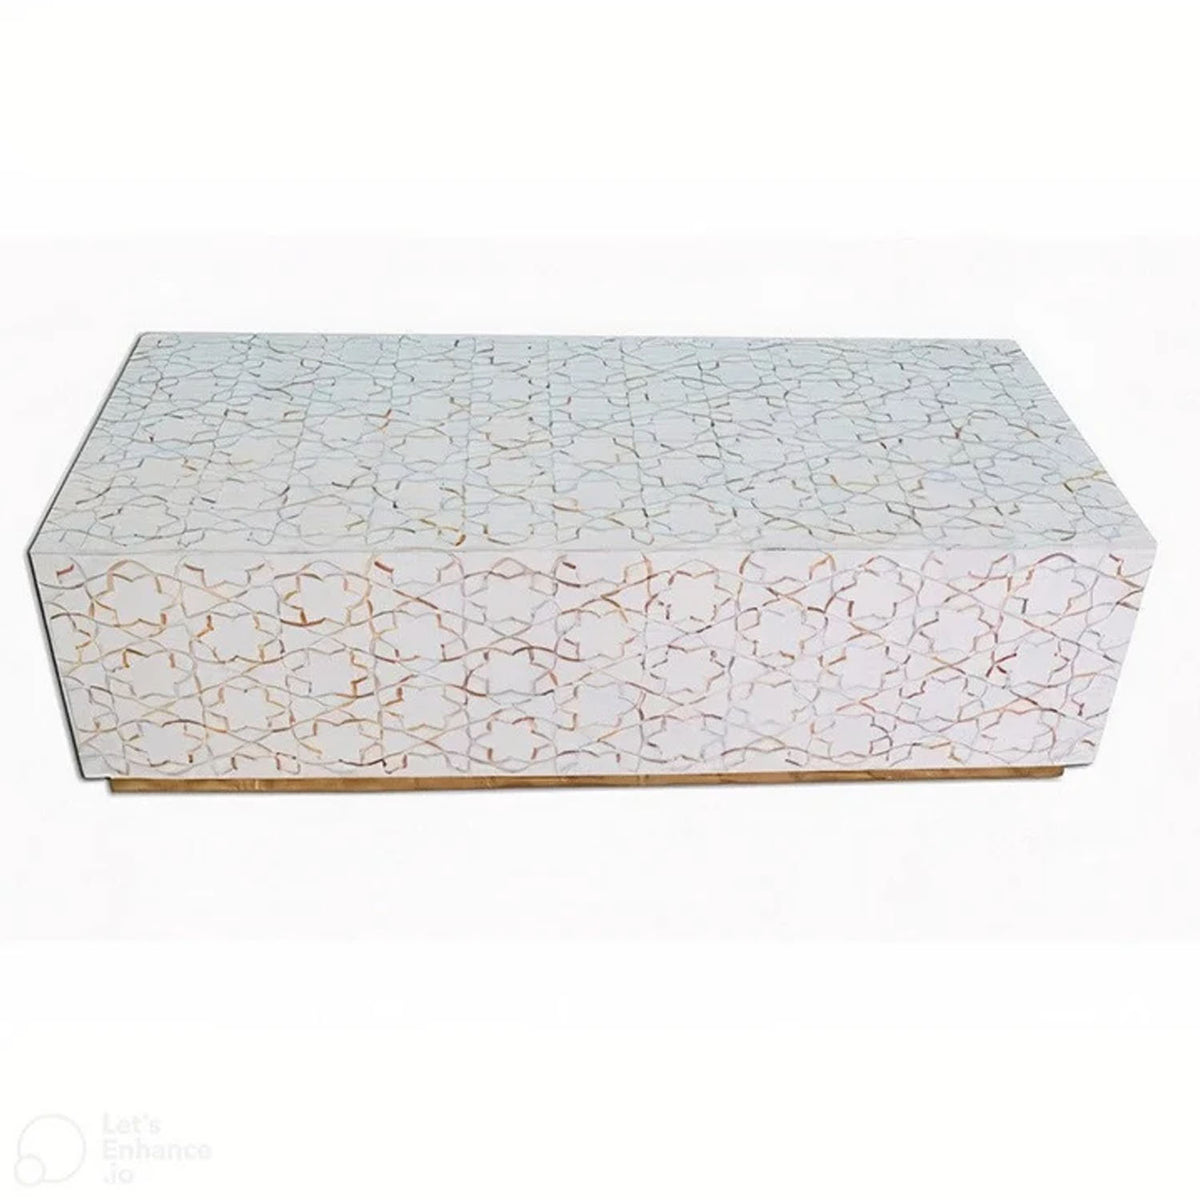 Luxurious Mother of Pearl Inlay Unique Star Pattern With Brass Metal Base Coffee Table | Mother Of Pearl Inlay Coffee Table - Notbrand